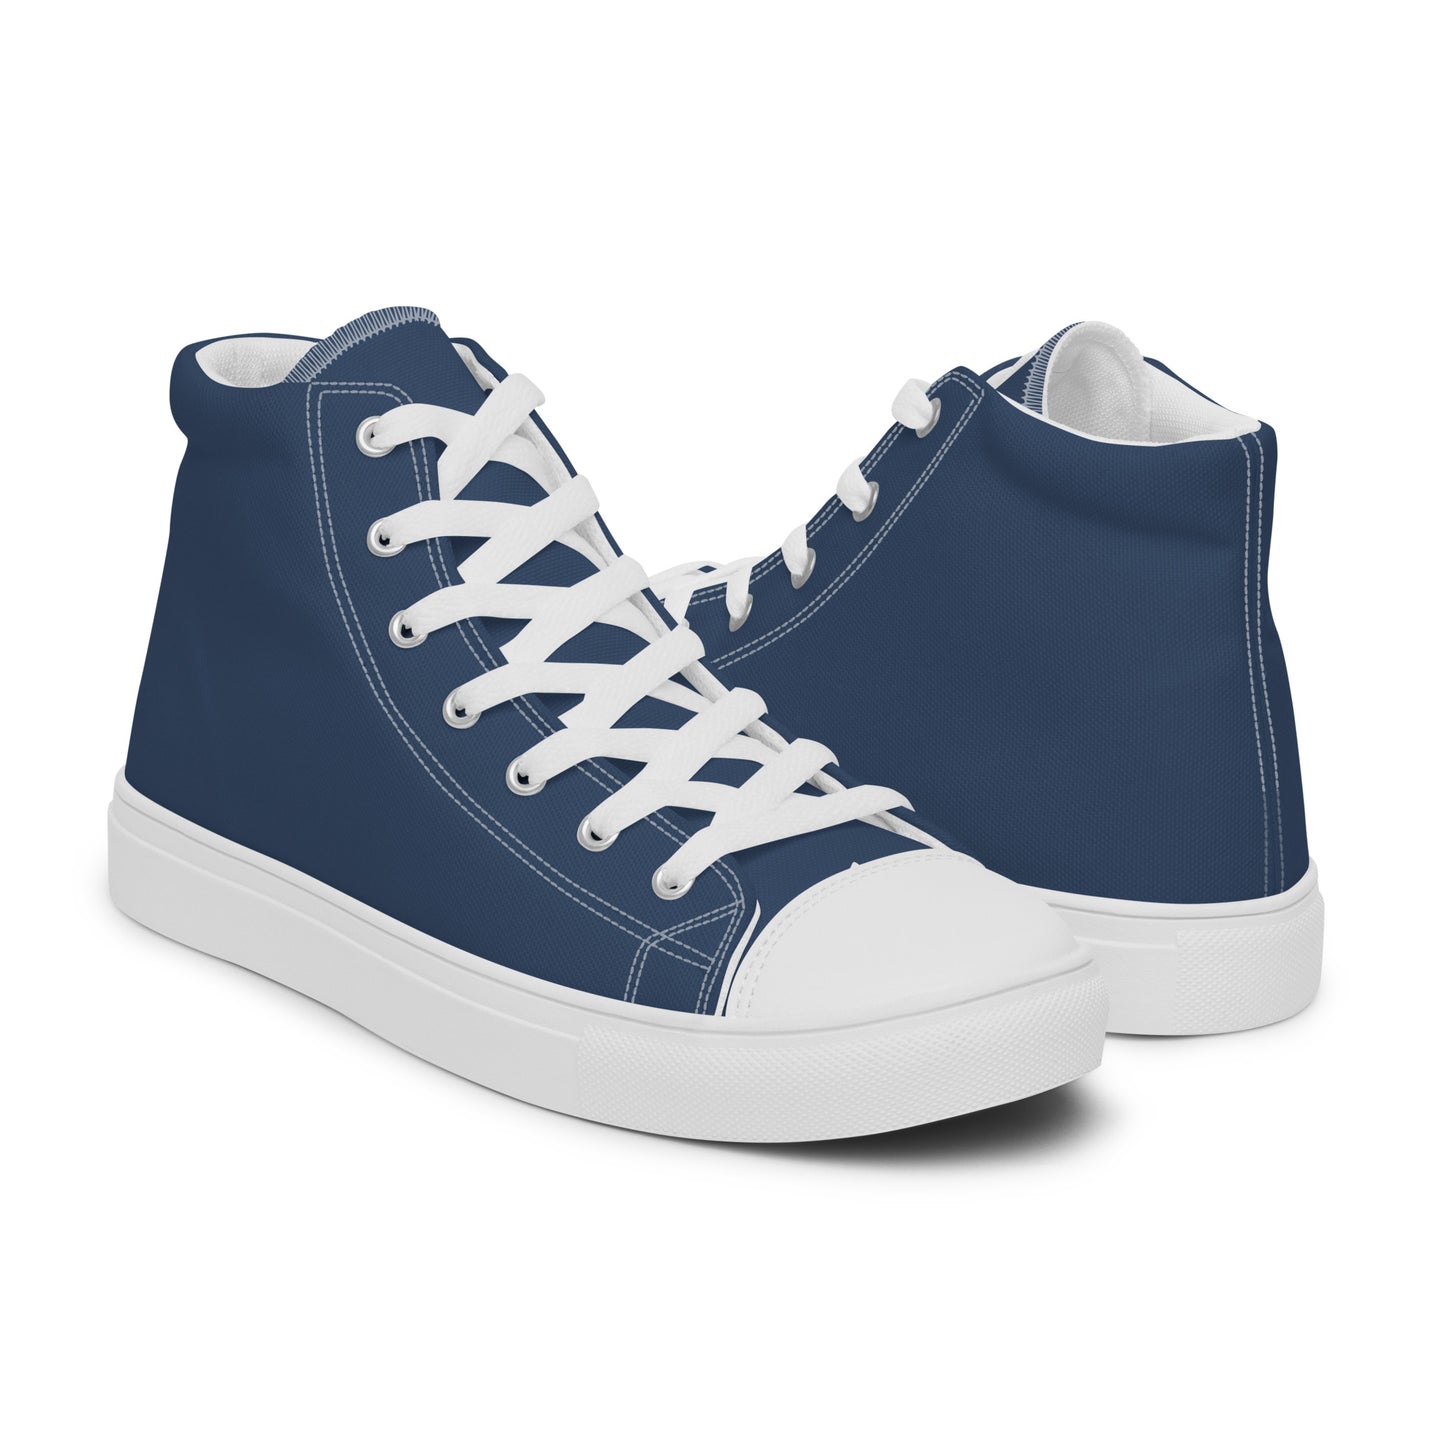 Navy Blue - Sustainably Made Men's High Top Canvas Shoes